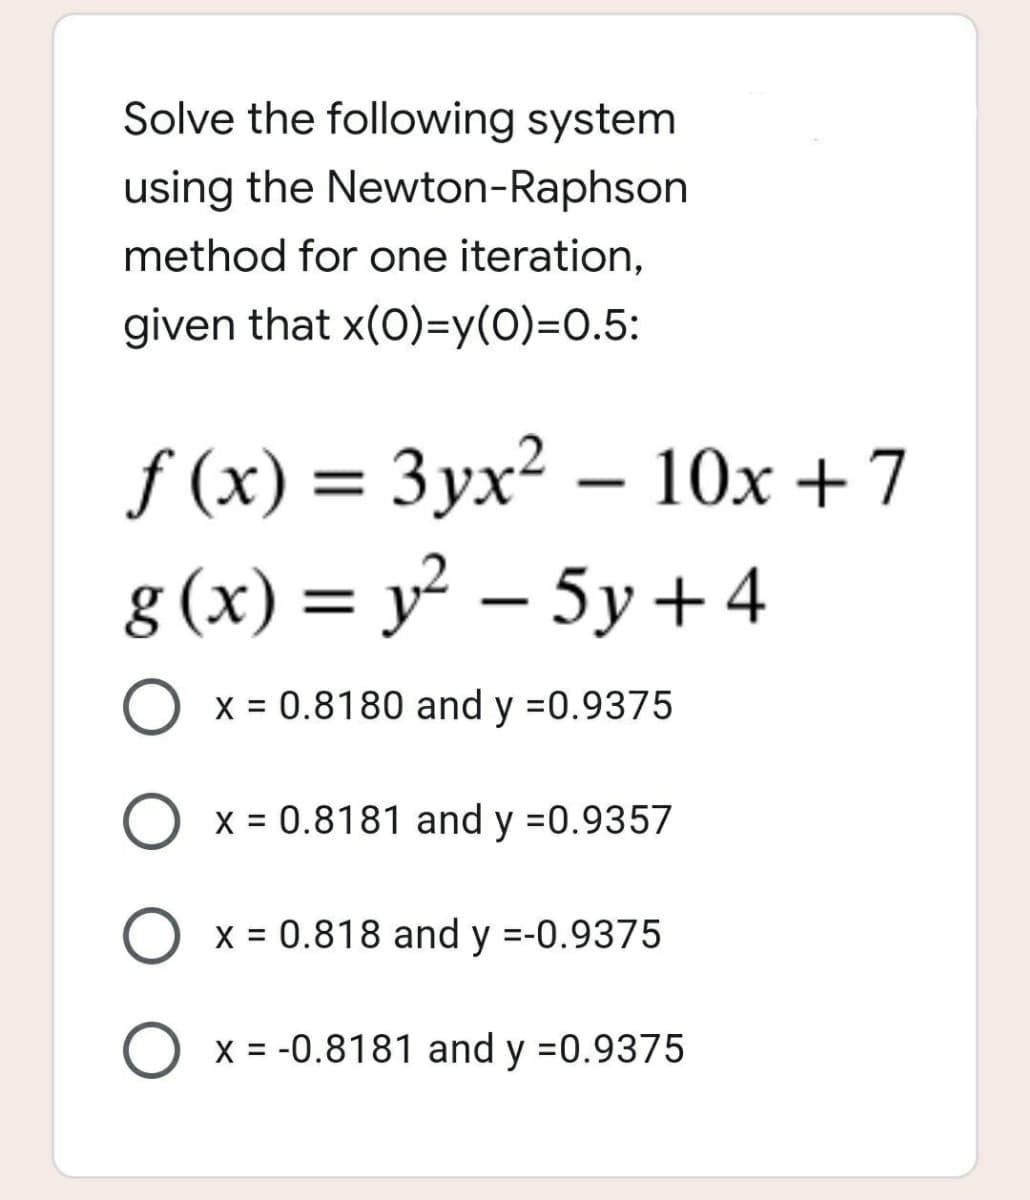 Solve the following system
using the Newton-Raphson
method for one iteration,
given that x(0)=y(0)=0.5:
f(x) = 3yx² - 10x + 7
g(x) = y² - 5y +4
O x = 0.8180 and y =0.9375
O x = 0.8181 and y =0.9357
O x = 0.818 and y =-0.9375
O x = -0.8181 and y =0.9375